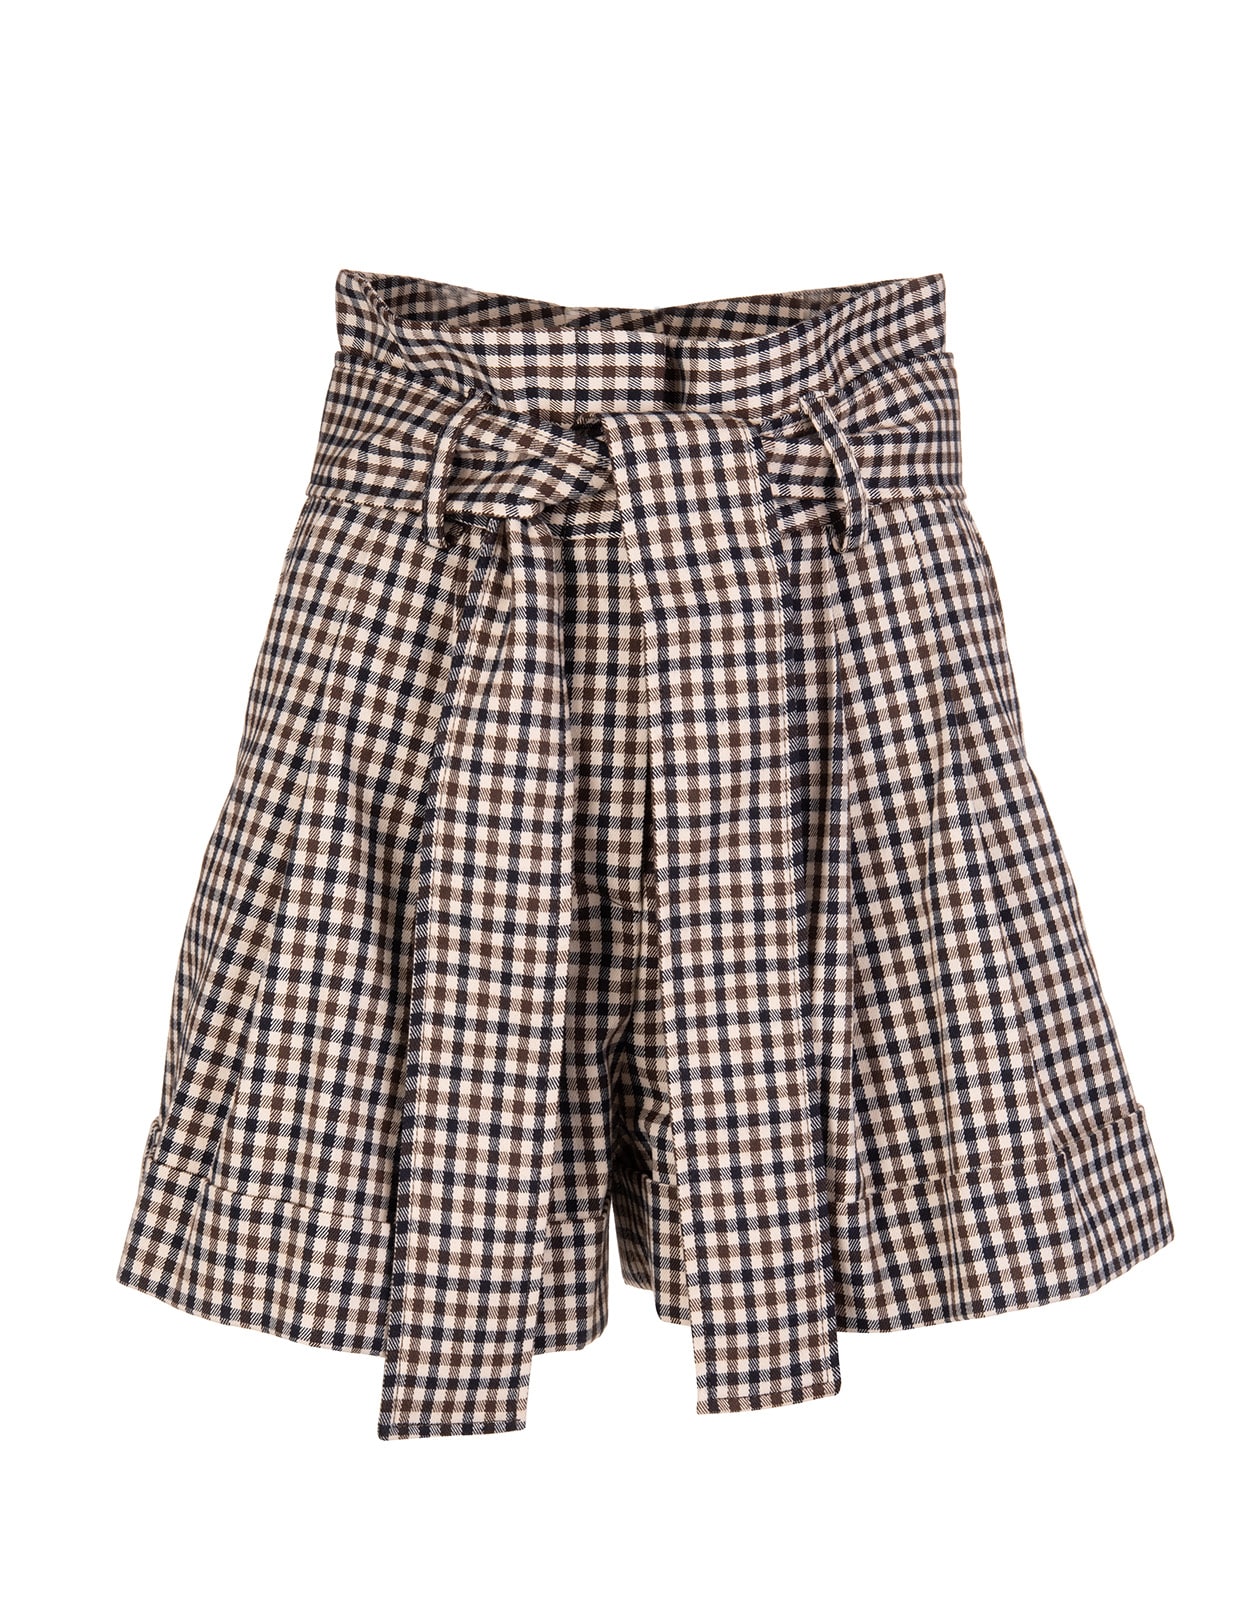 Parosh Blue And Brown Gingham Checked Peck Shorts